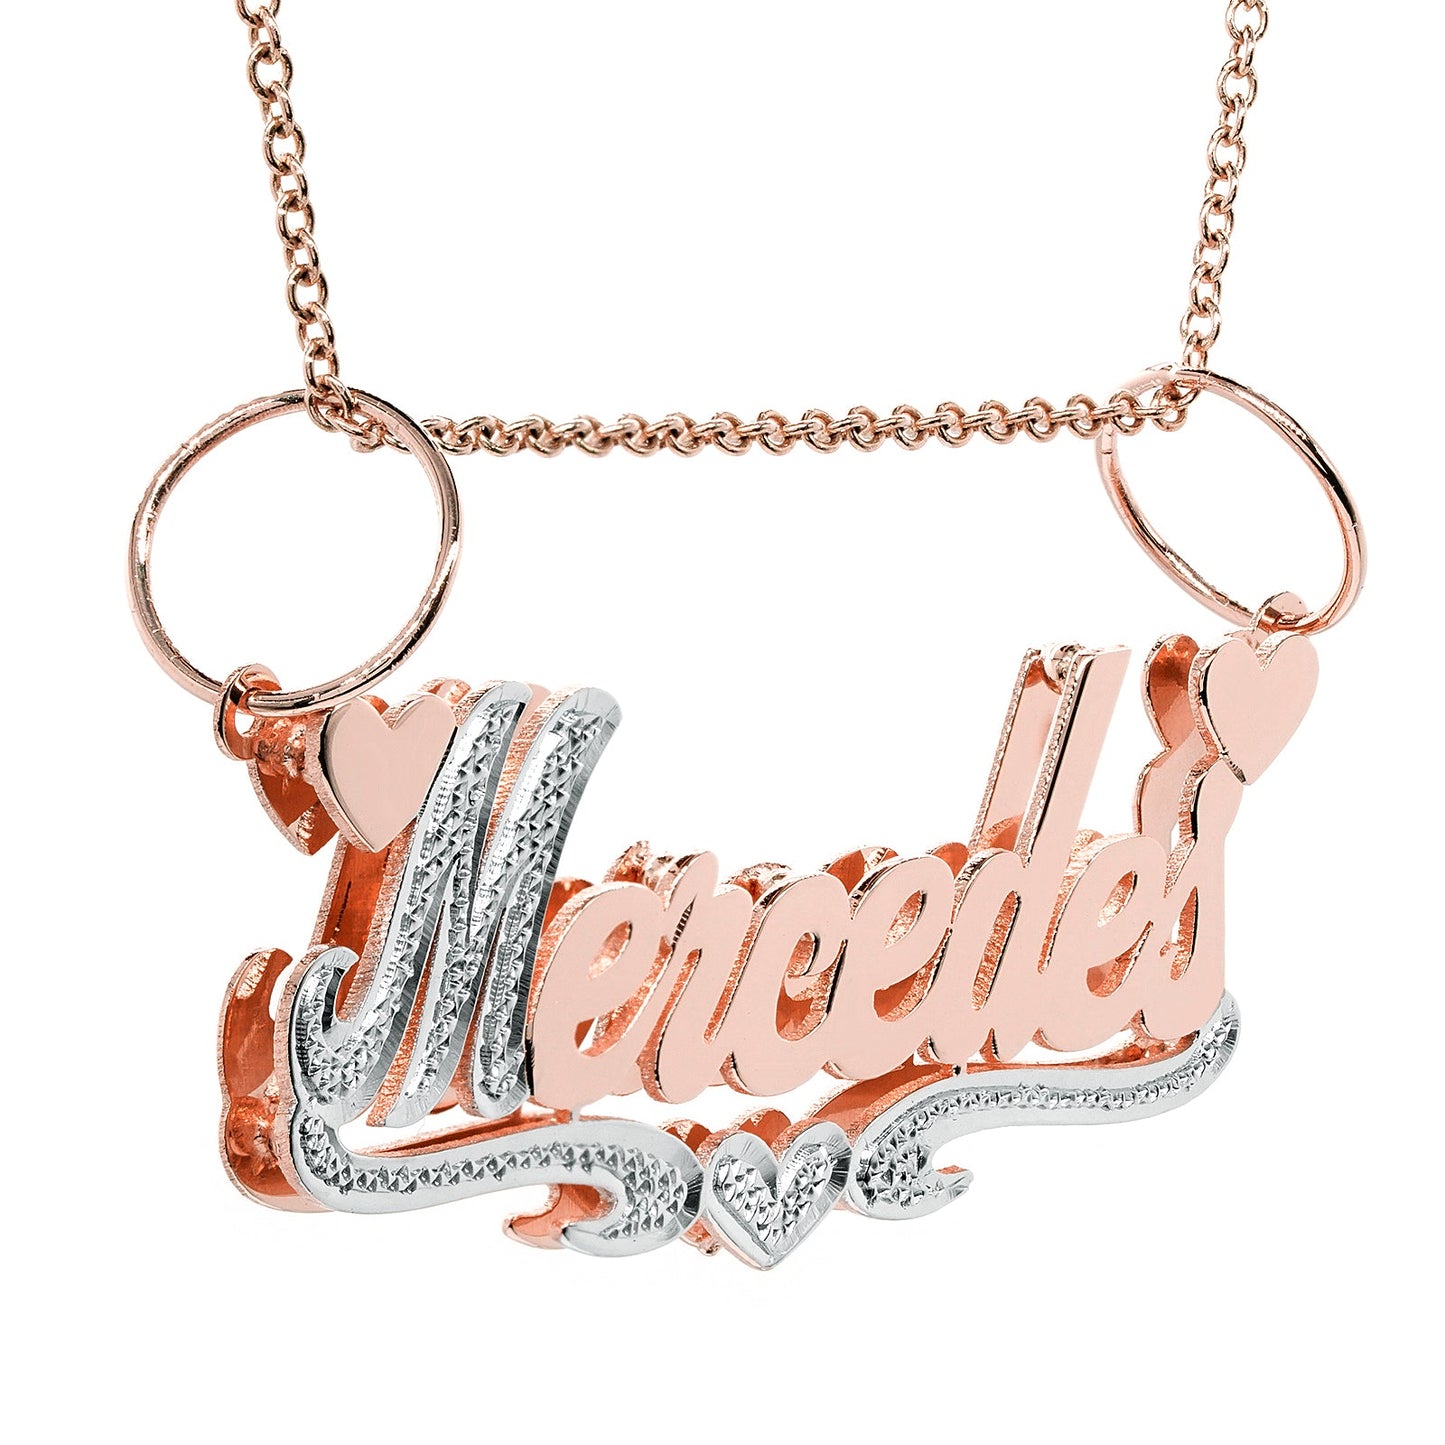 Double Layer Nameplate Pendant with Rhodium Sparkle. Double Bails for Attaching Chain